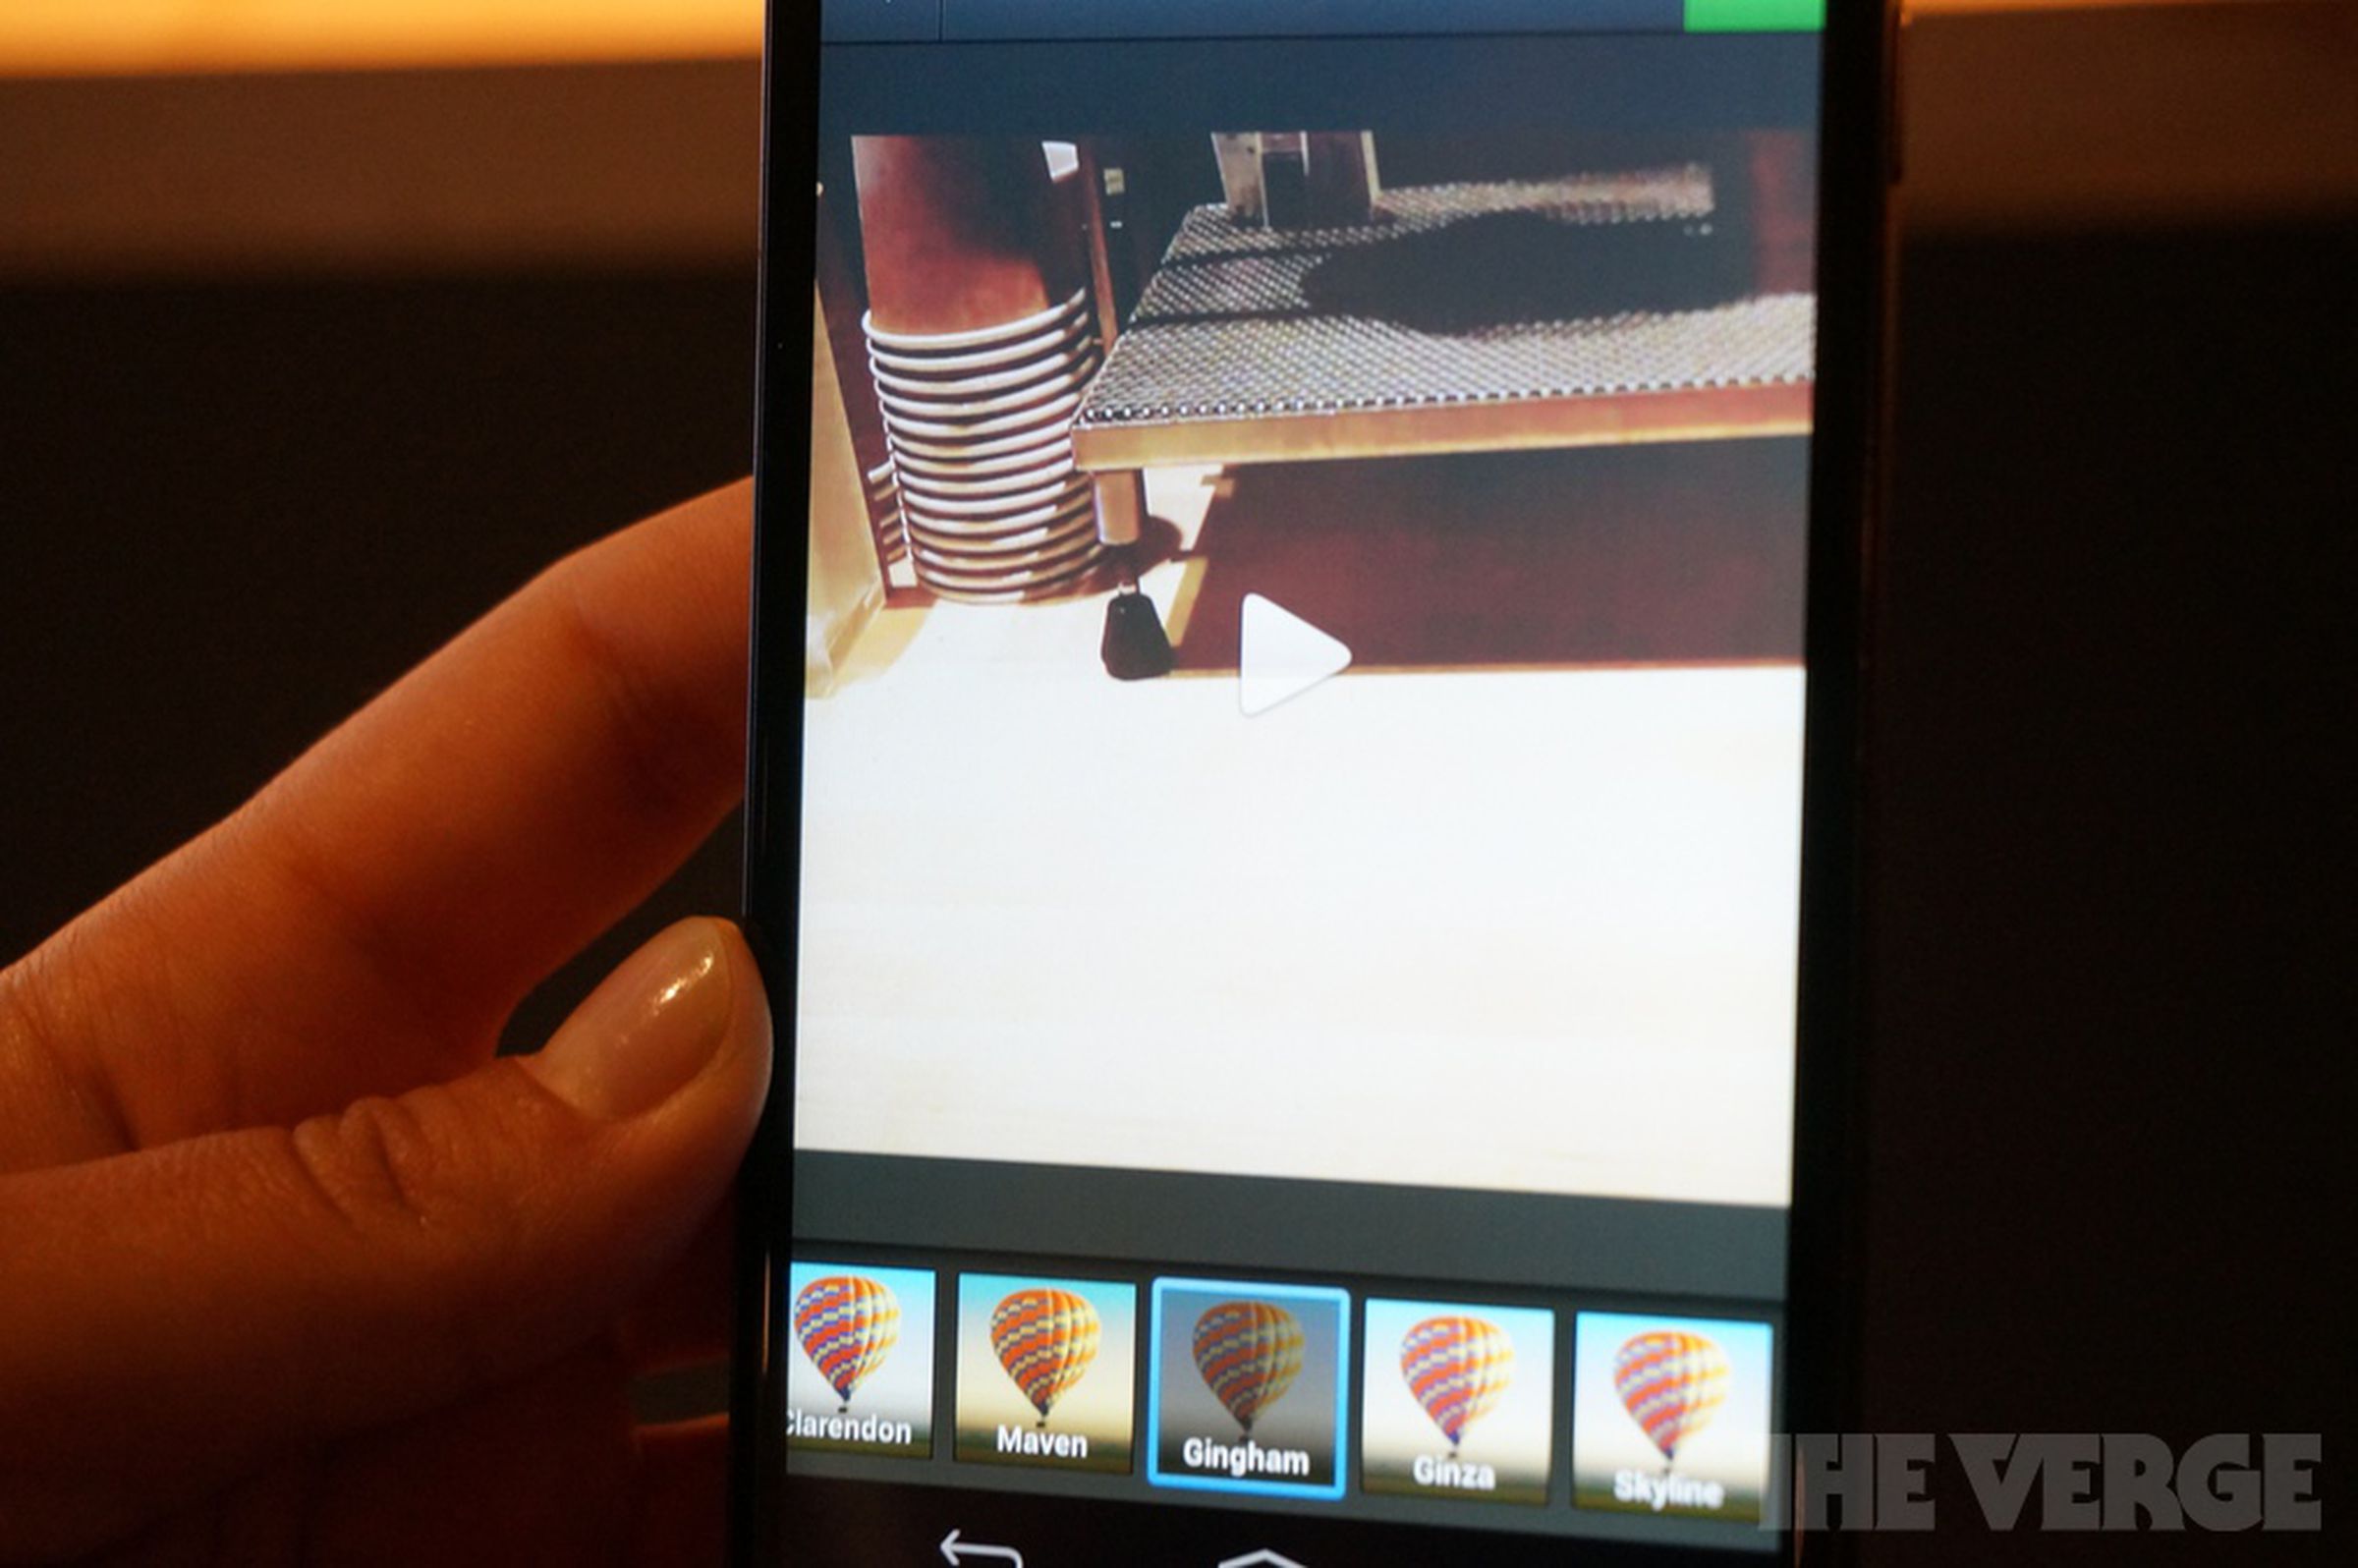 Instagram video on Android Hands-on photos